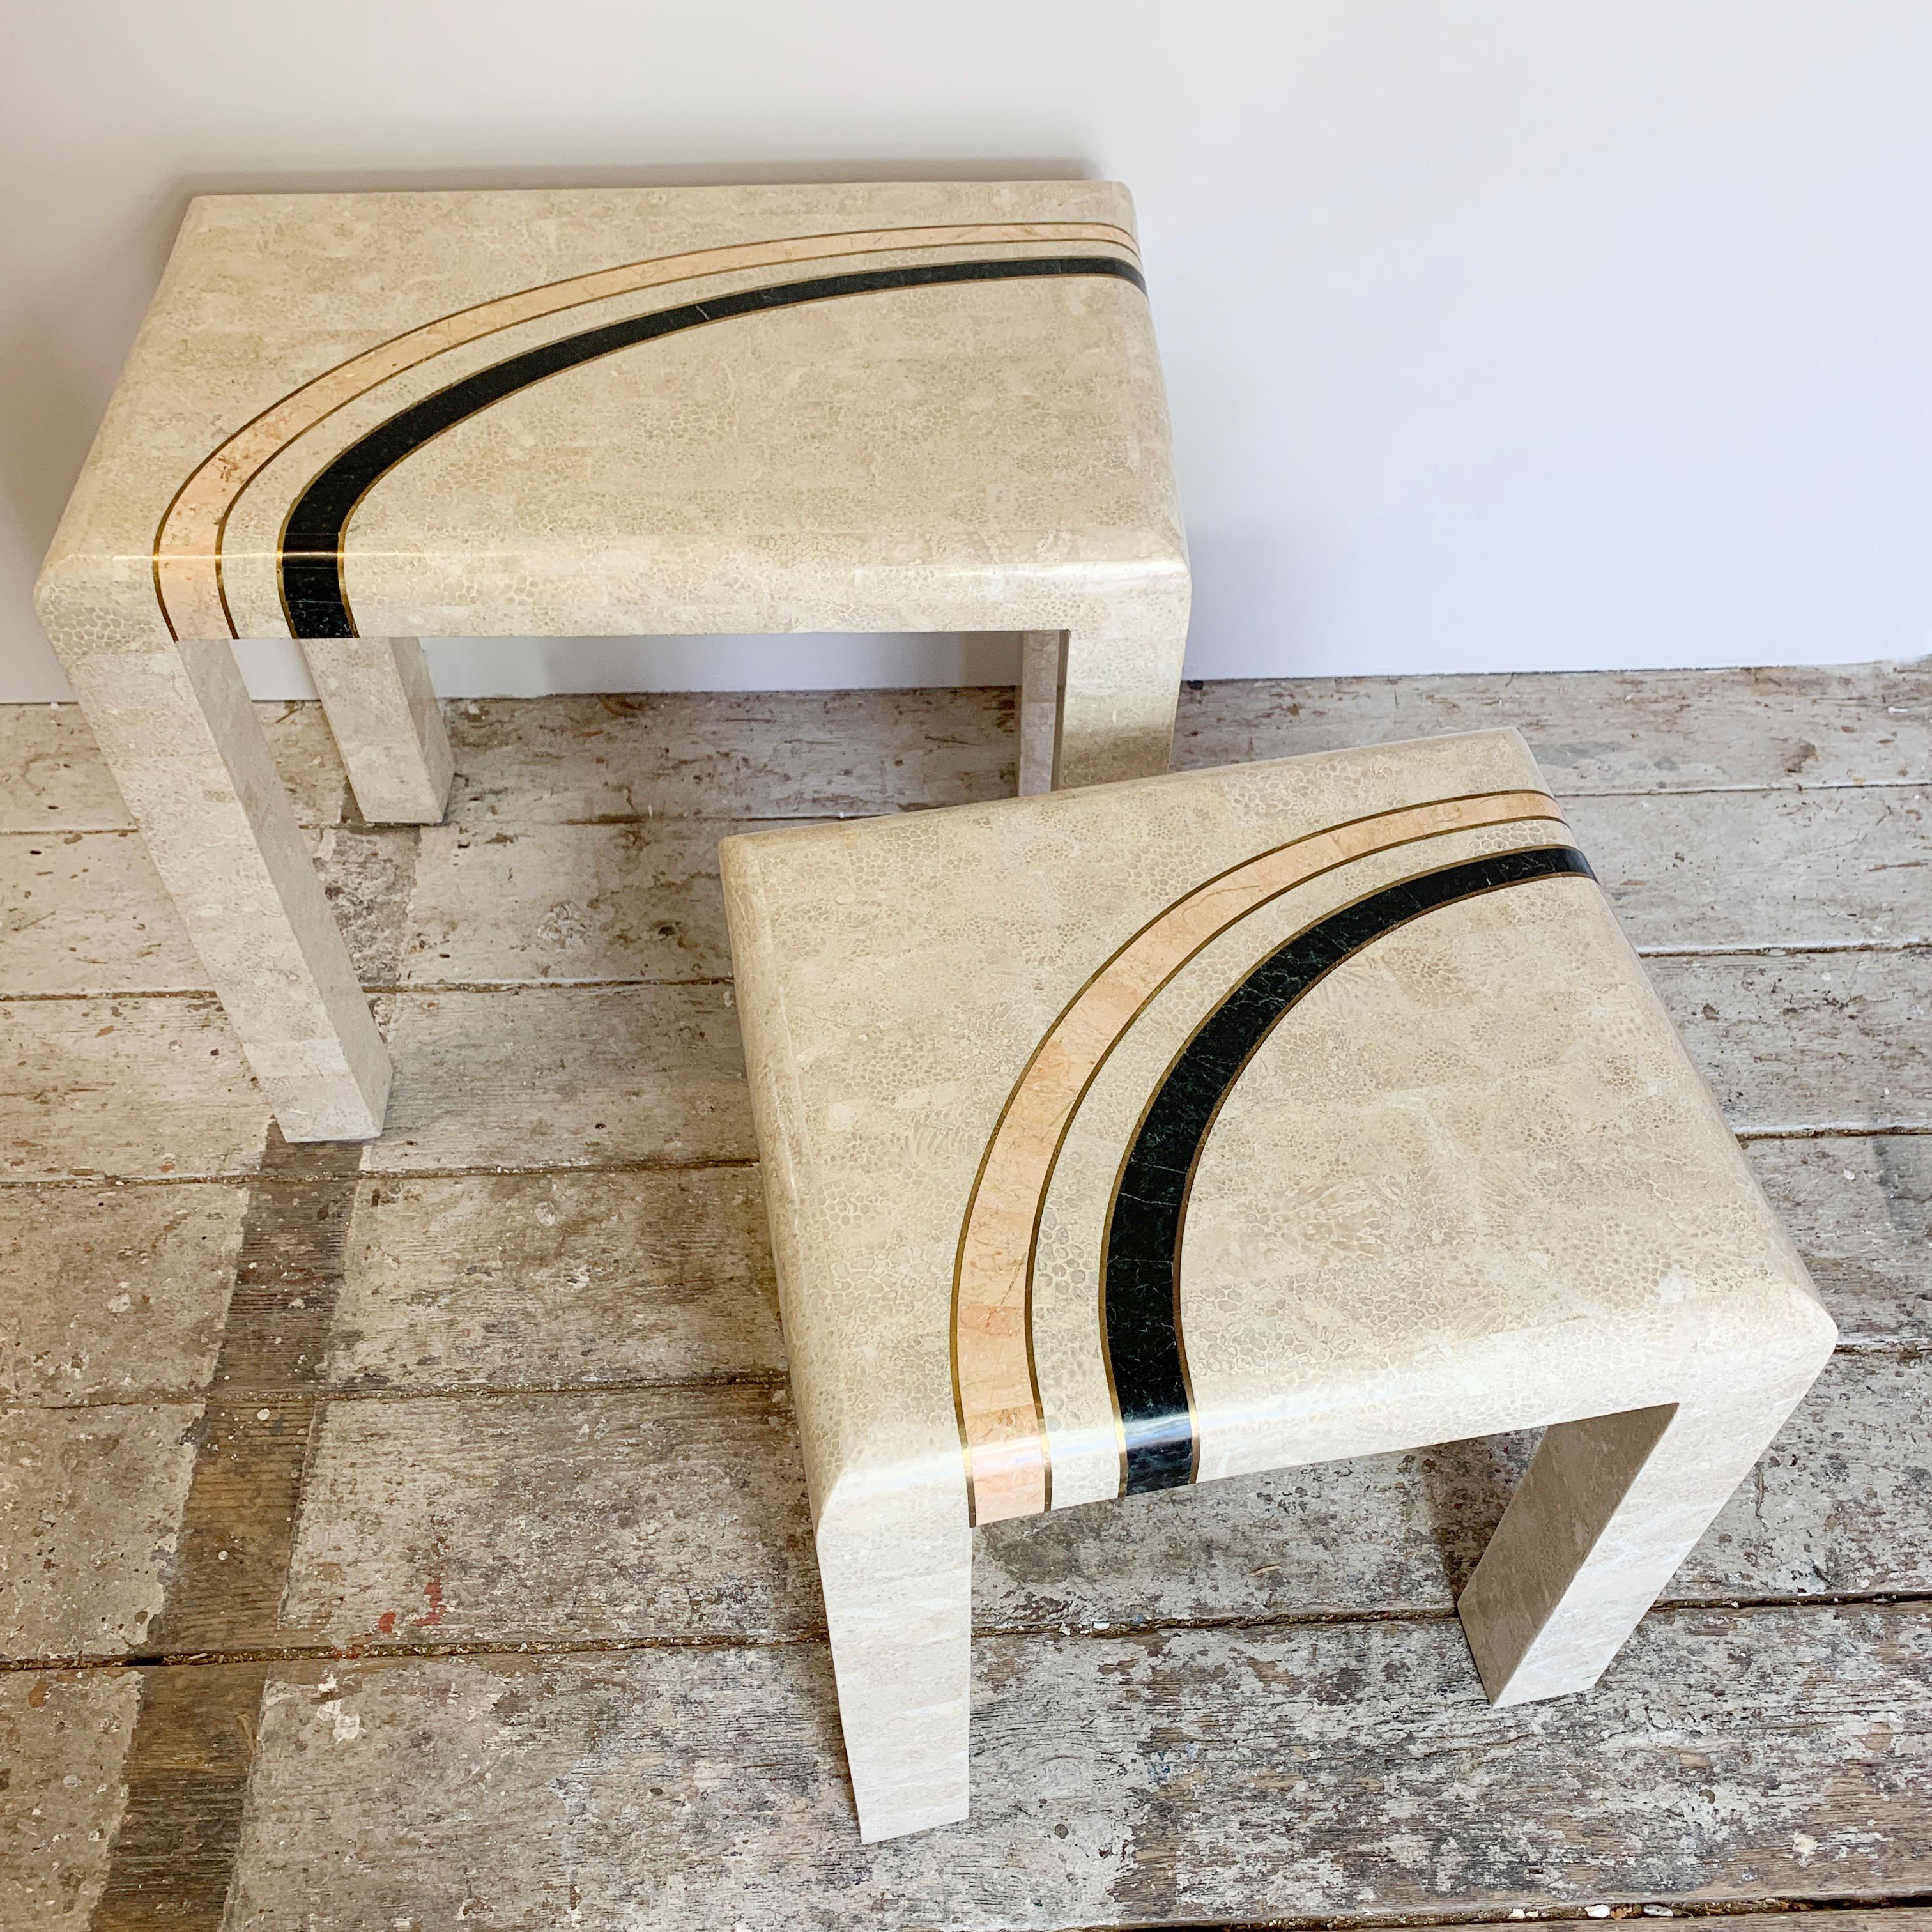 Casa Bique nesting tables
1980s
Attributed to designer Robert Marcius for Casa Bique
A pair of tables in tessellated marble
Featuring an abstract curve design in black and soft pink, accented with brass inlay
Constructed of tessellated marble/fossil